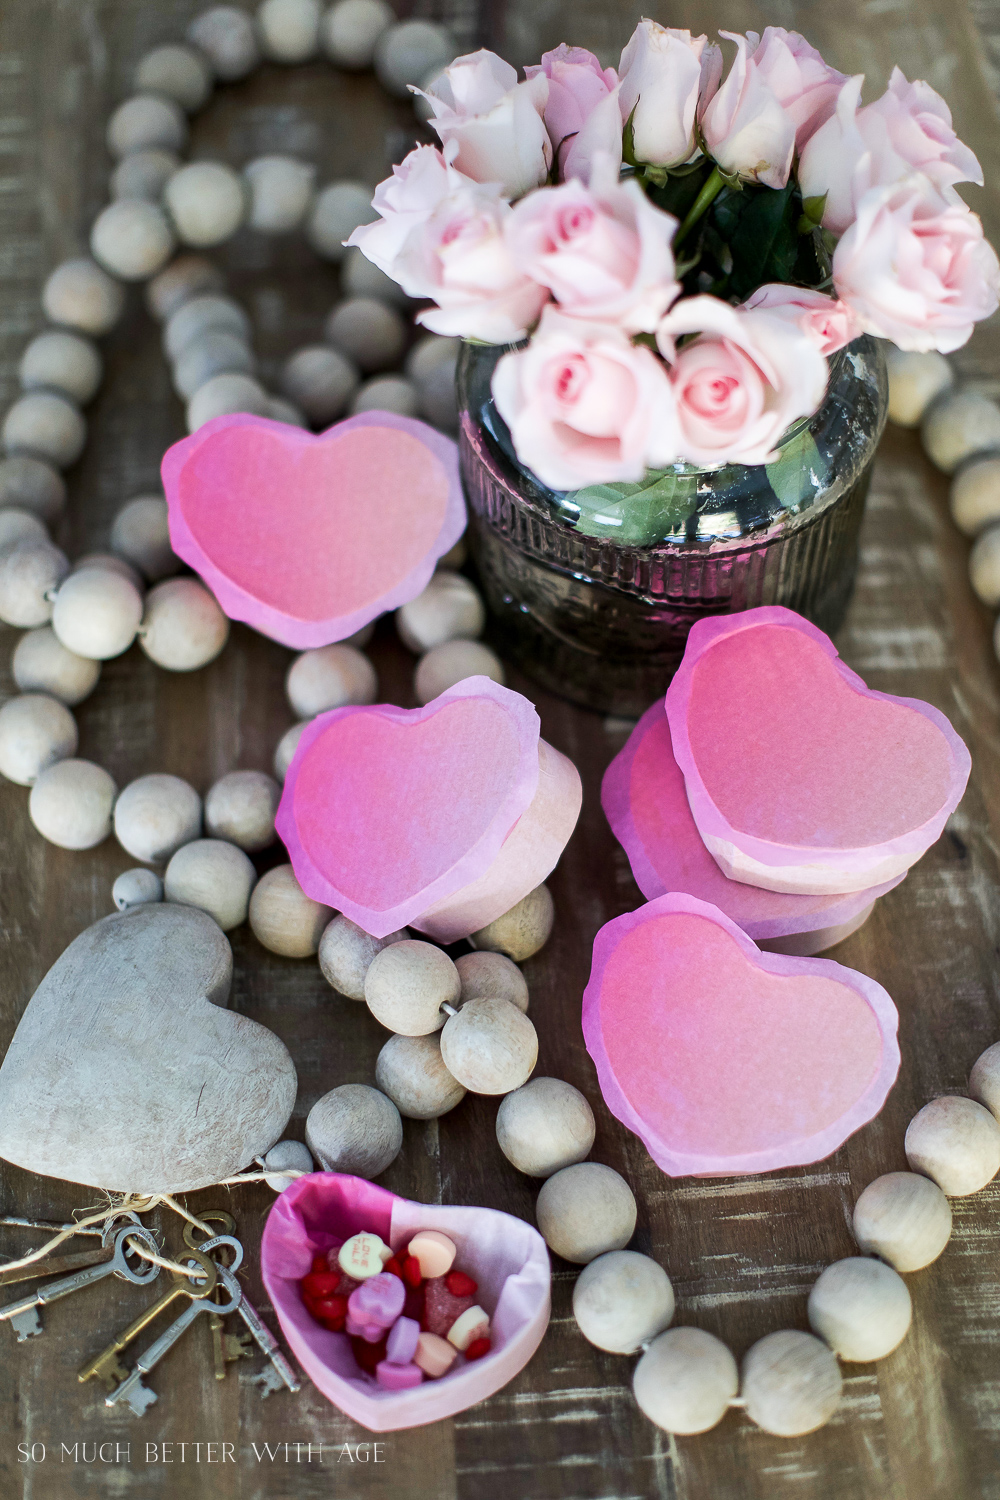  Flowers, and wooden hearts on the table.